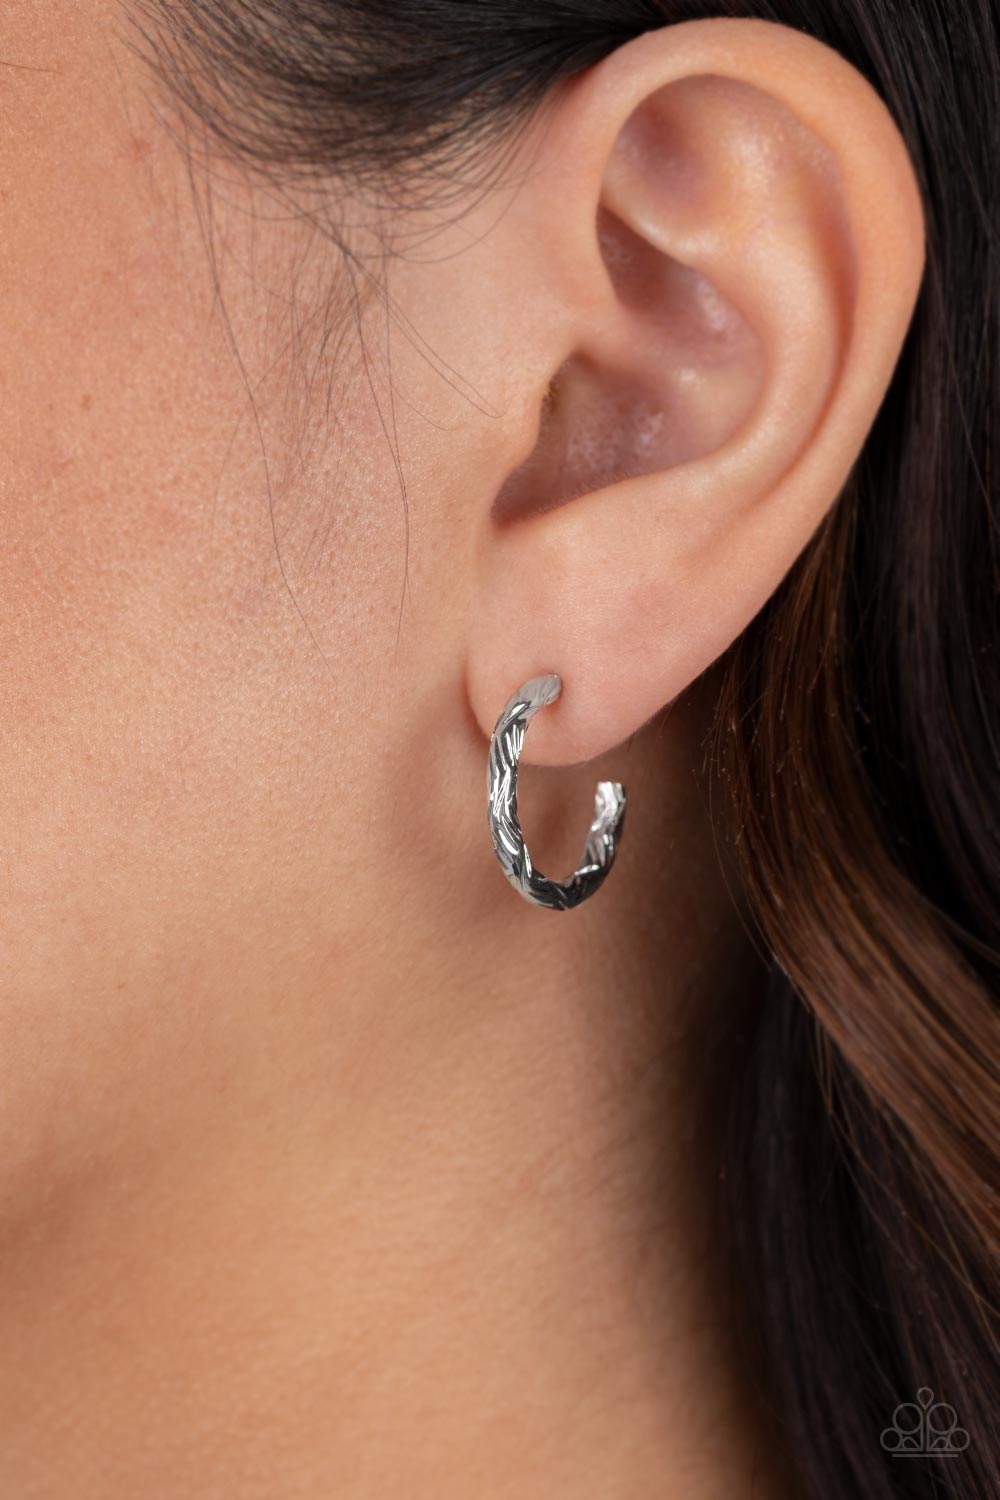 Triumphantly Textured Silver Hoop Earring - Paparazzi Accessories   A delicate band of silver is etched in linear textures, curling around the ear to create a small, classic hoop. Earring attaches to a standard post fitting. Hoop measures approximately 1/2" in diameter.  Sold as one pair of hoop earrings.